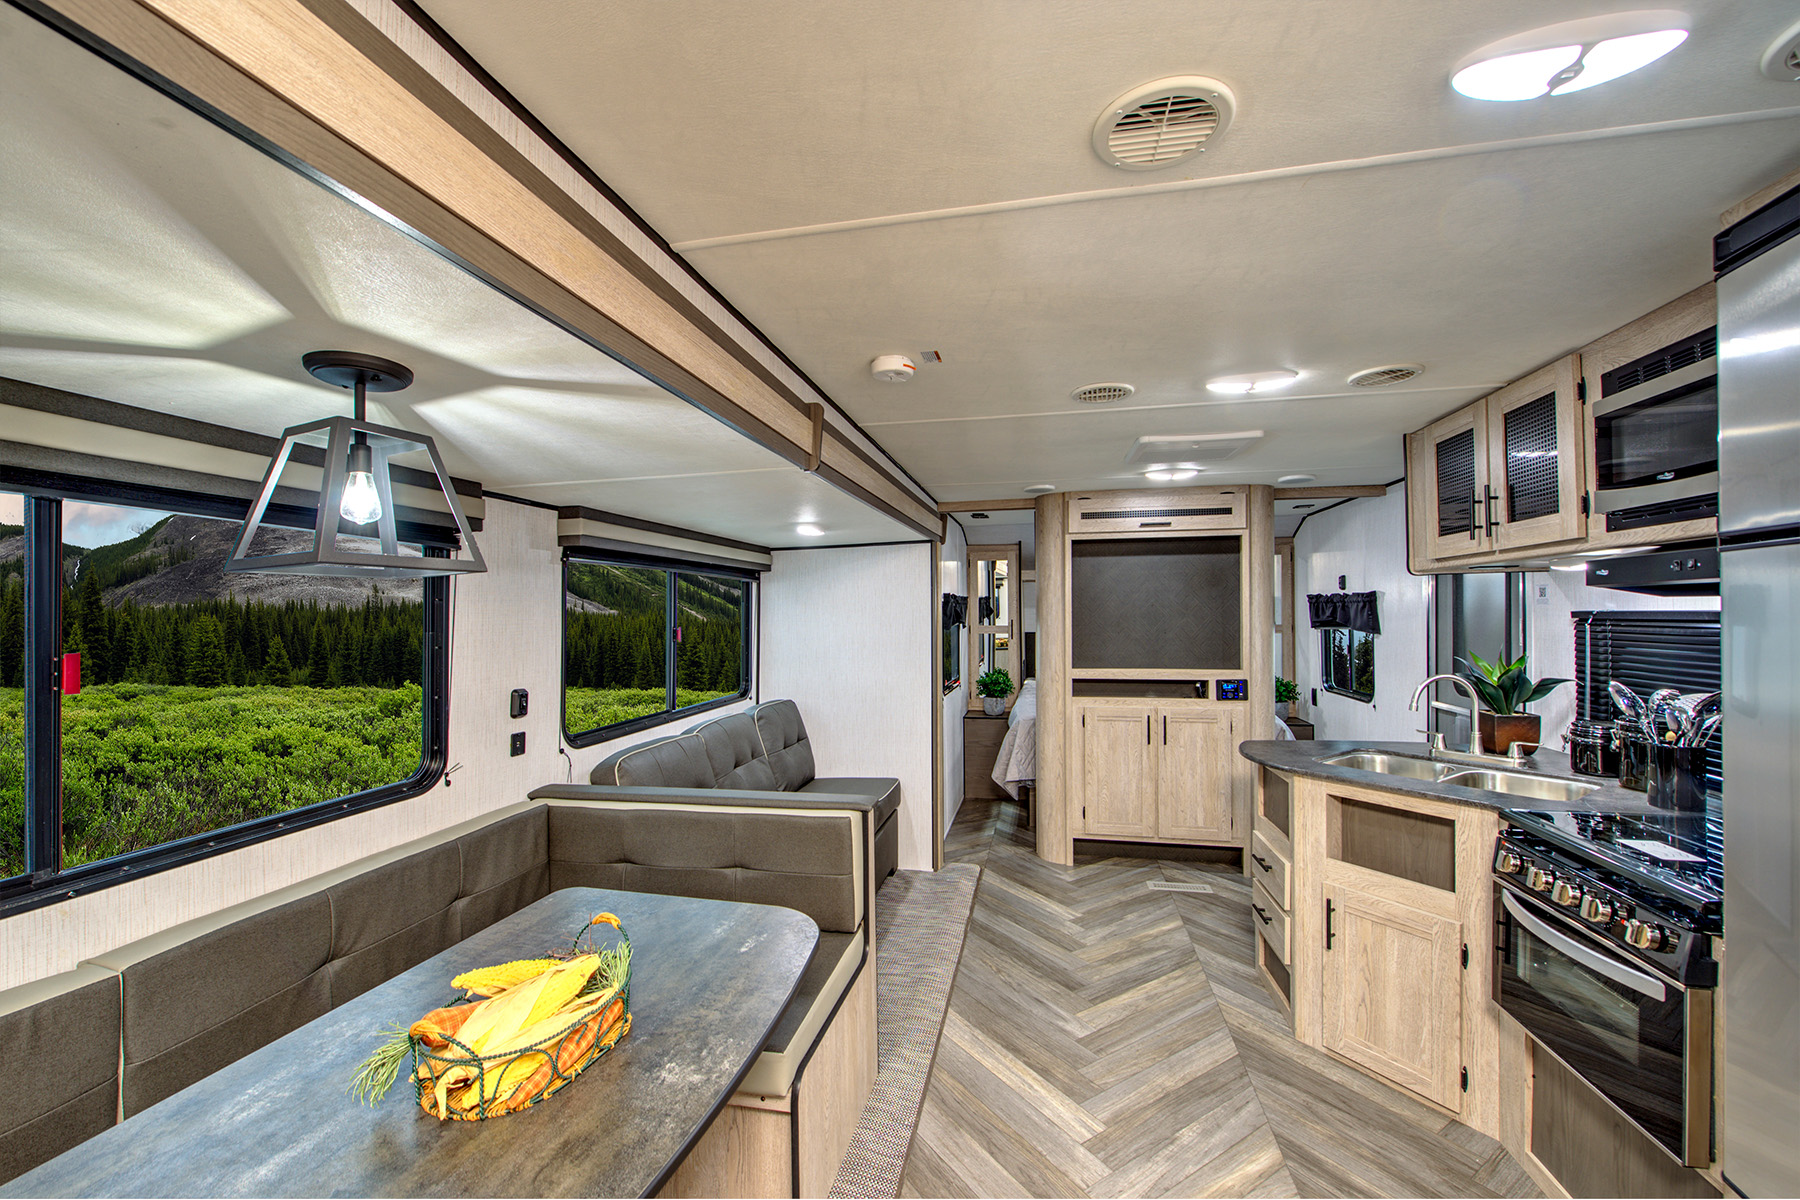 2023 HEARTLAND Prowler - 300 SBH for sale in the Pompano Beach, FL area. Get the best drive out price on 2023 HEARTLAND Prowler - 300 SBH and compare.